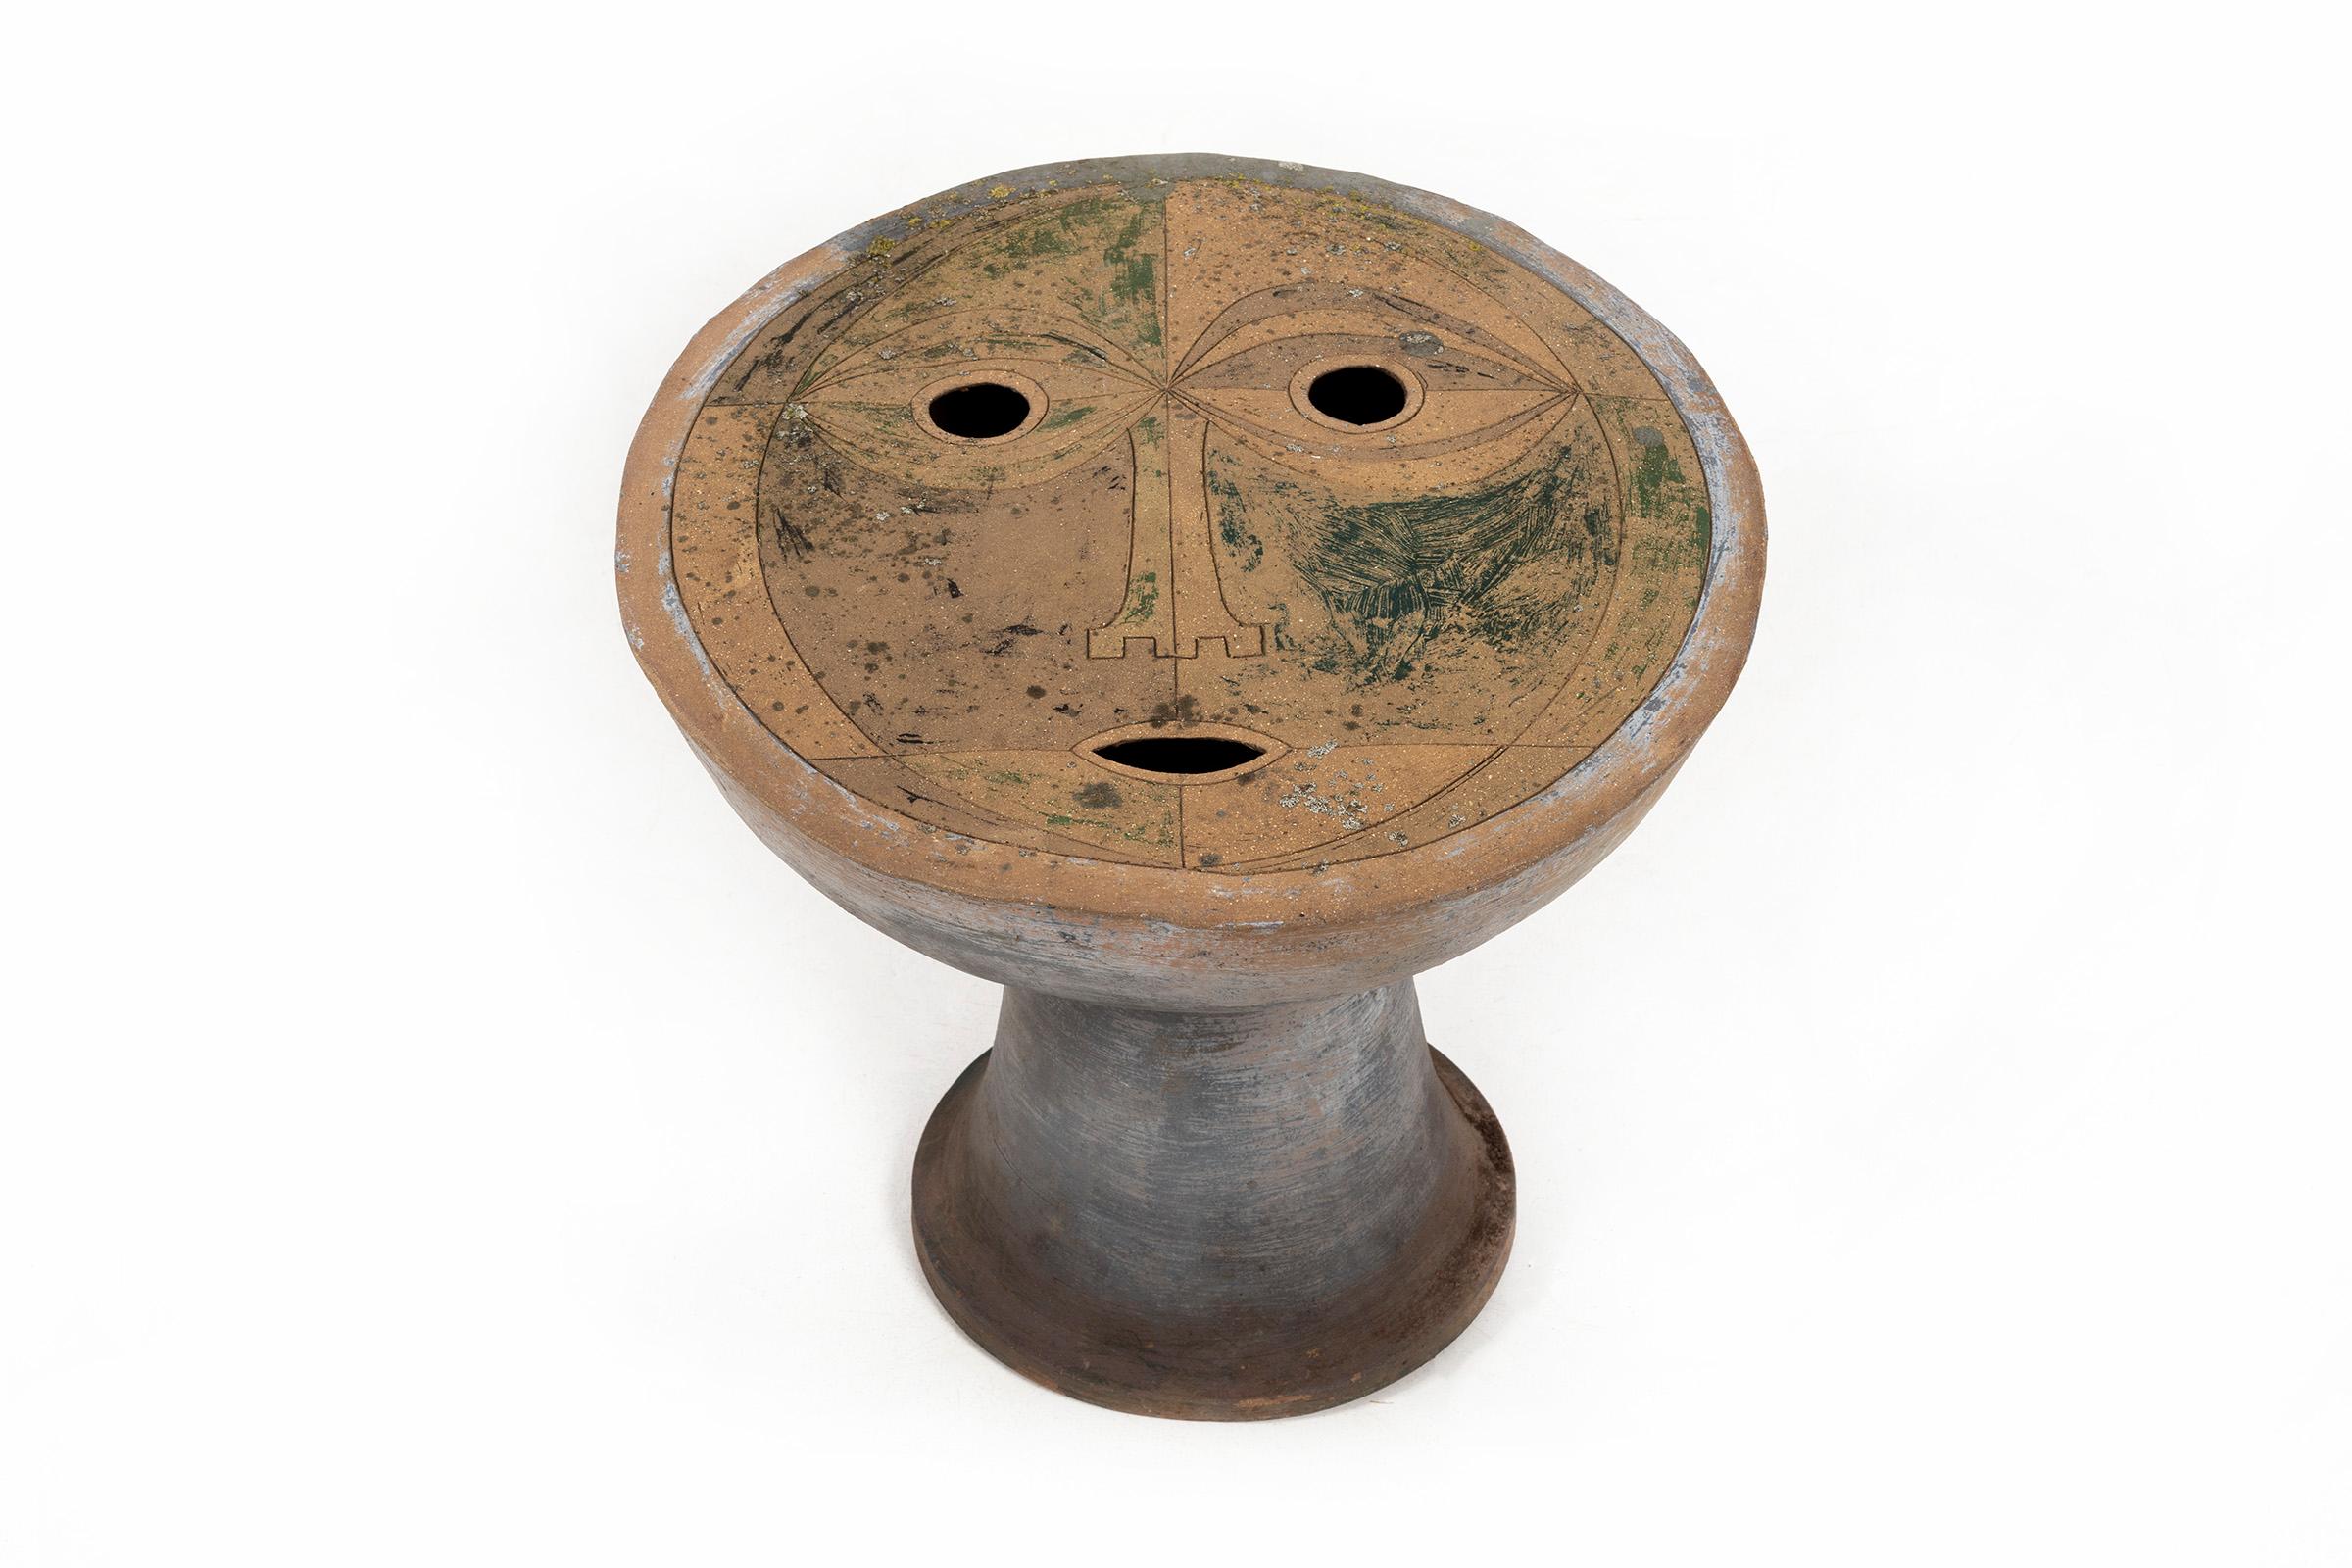 Clyde Burt Face Ceramic Table vase in glazed stoneware with incised facial carvings.
Signature to underside: [CB].